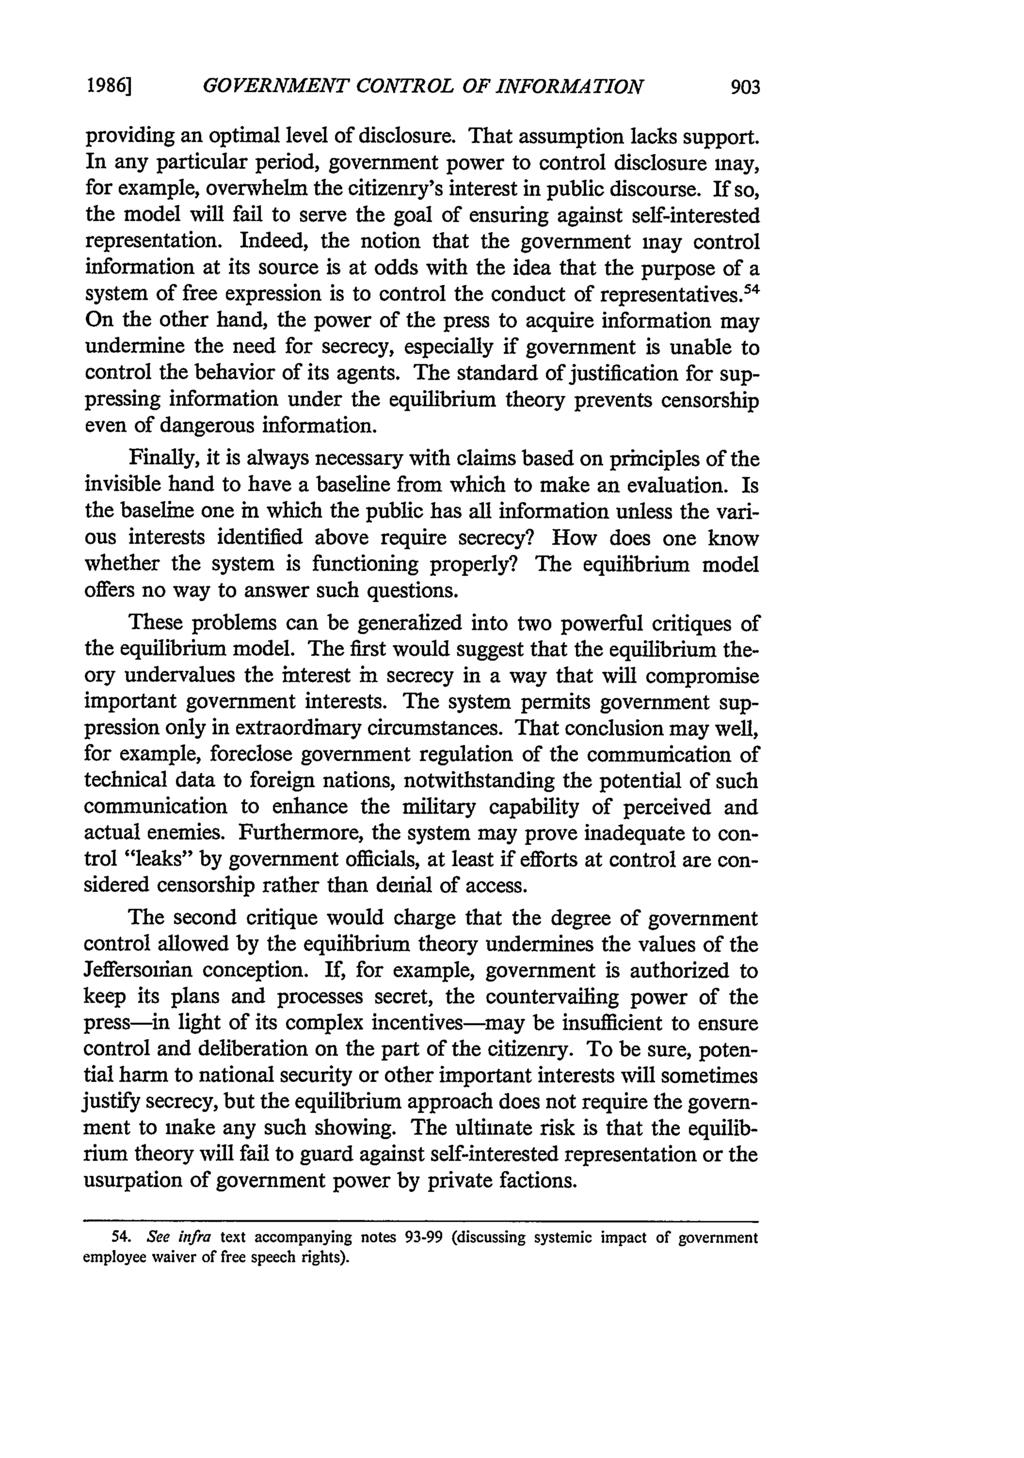 1986] GO VERNMENT CONTROL OF INFORMATION providing an optimal level of disclosure. That assumption lacks support.